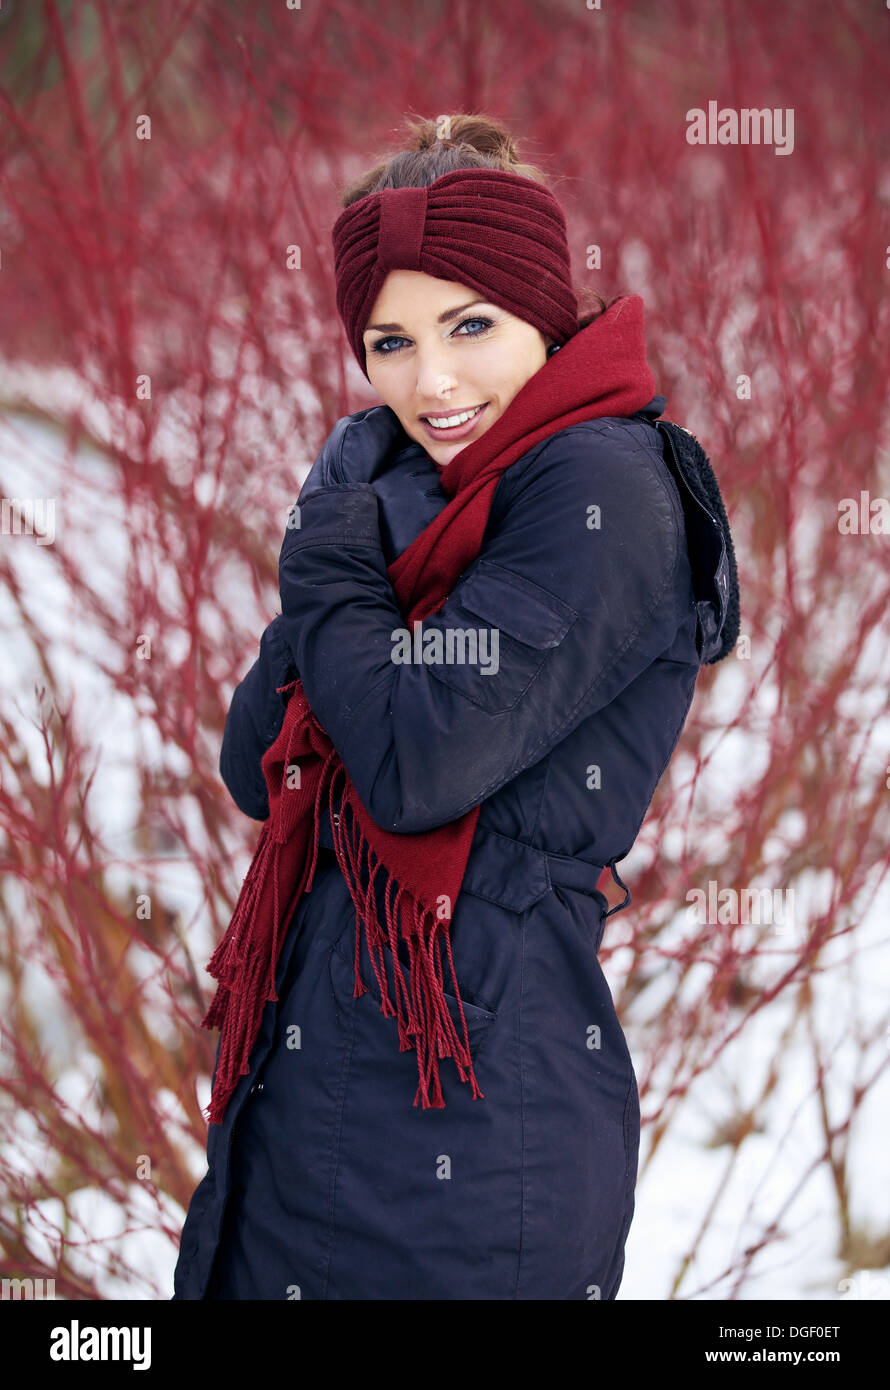 Shivering woman with red scarf in a cold winter park Stock Photo